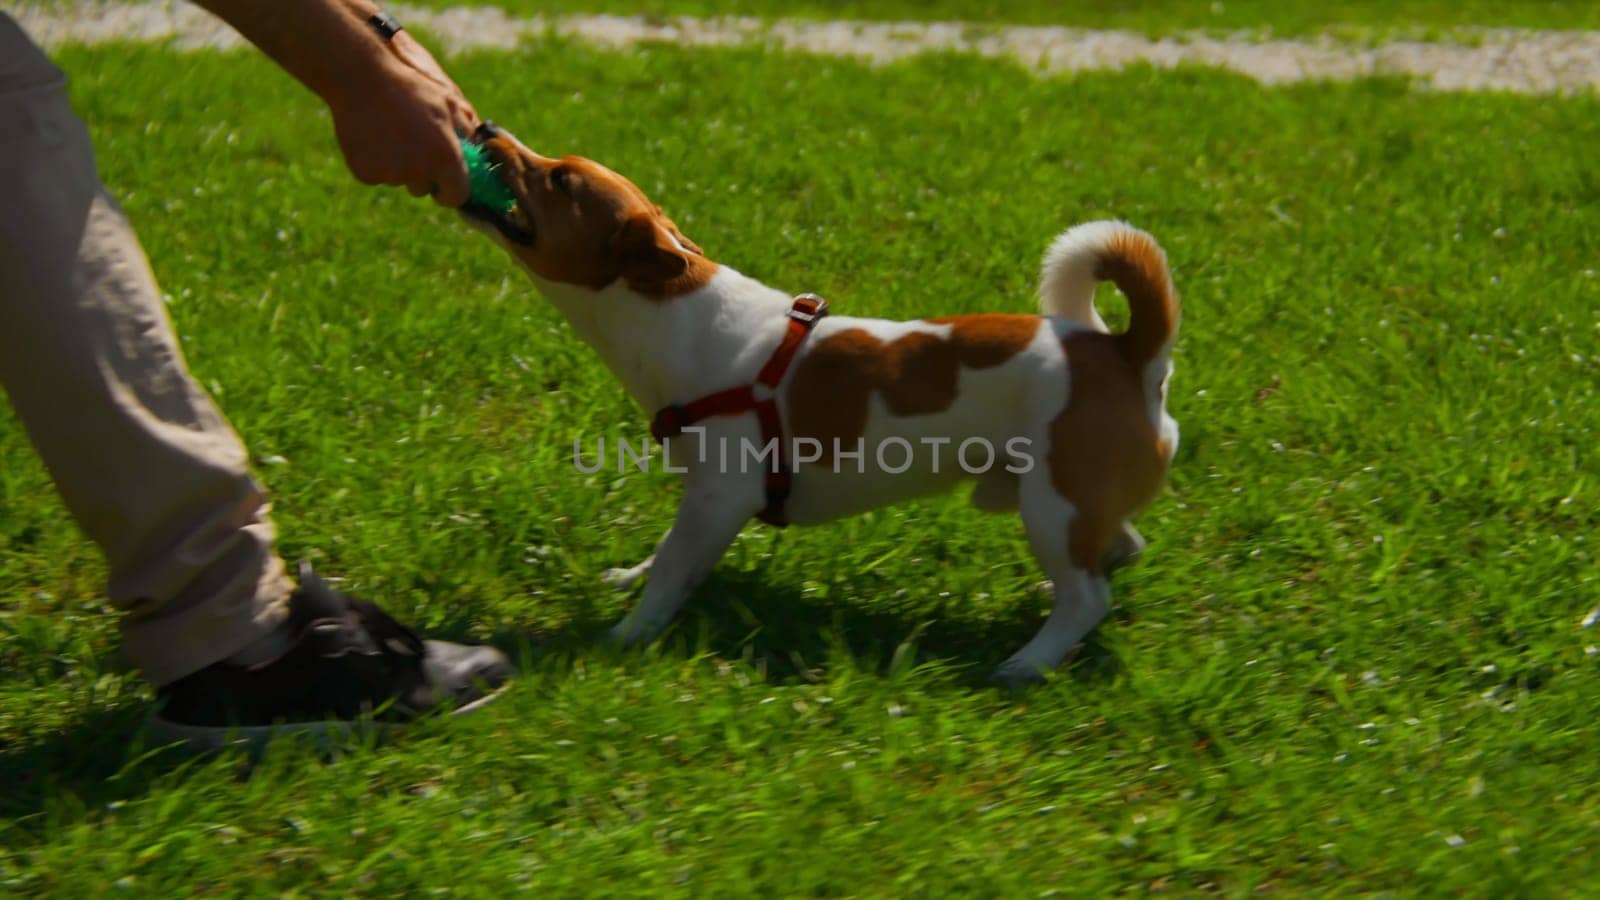 Man is actively playing with dog on grass. Stock footage. Active recreation with dog in park on sunny summer day. Man plays ball with dog on green grass in park.